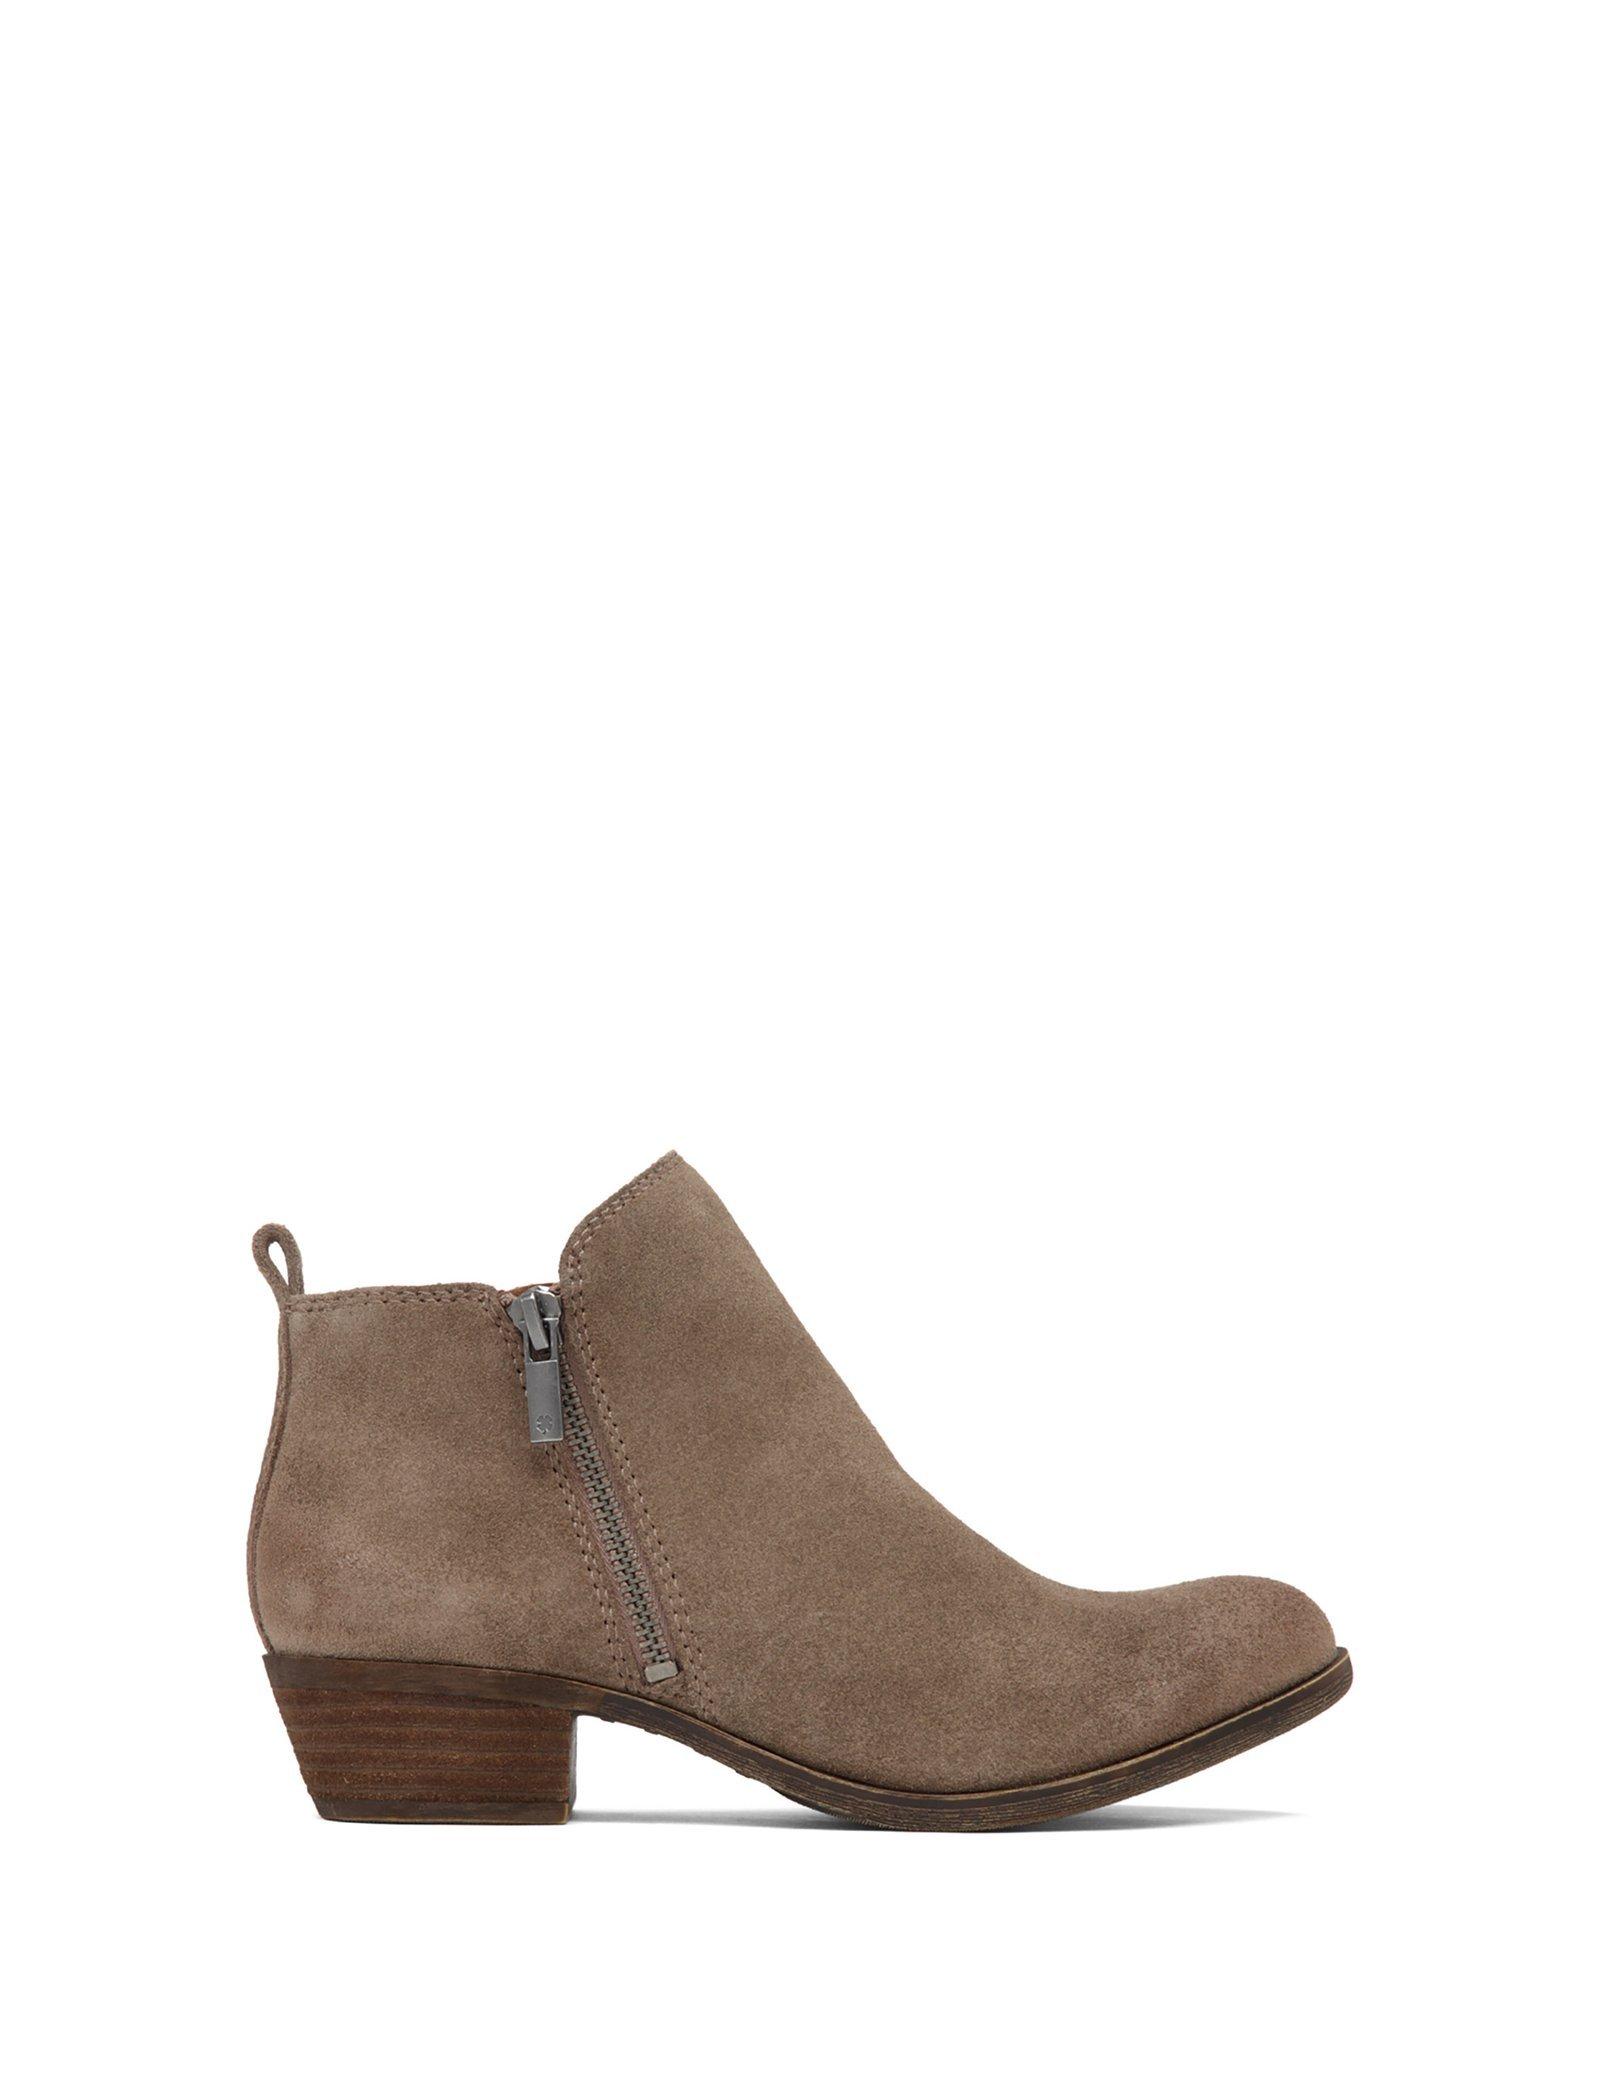 lucky brand booties canada